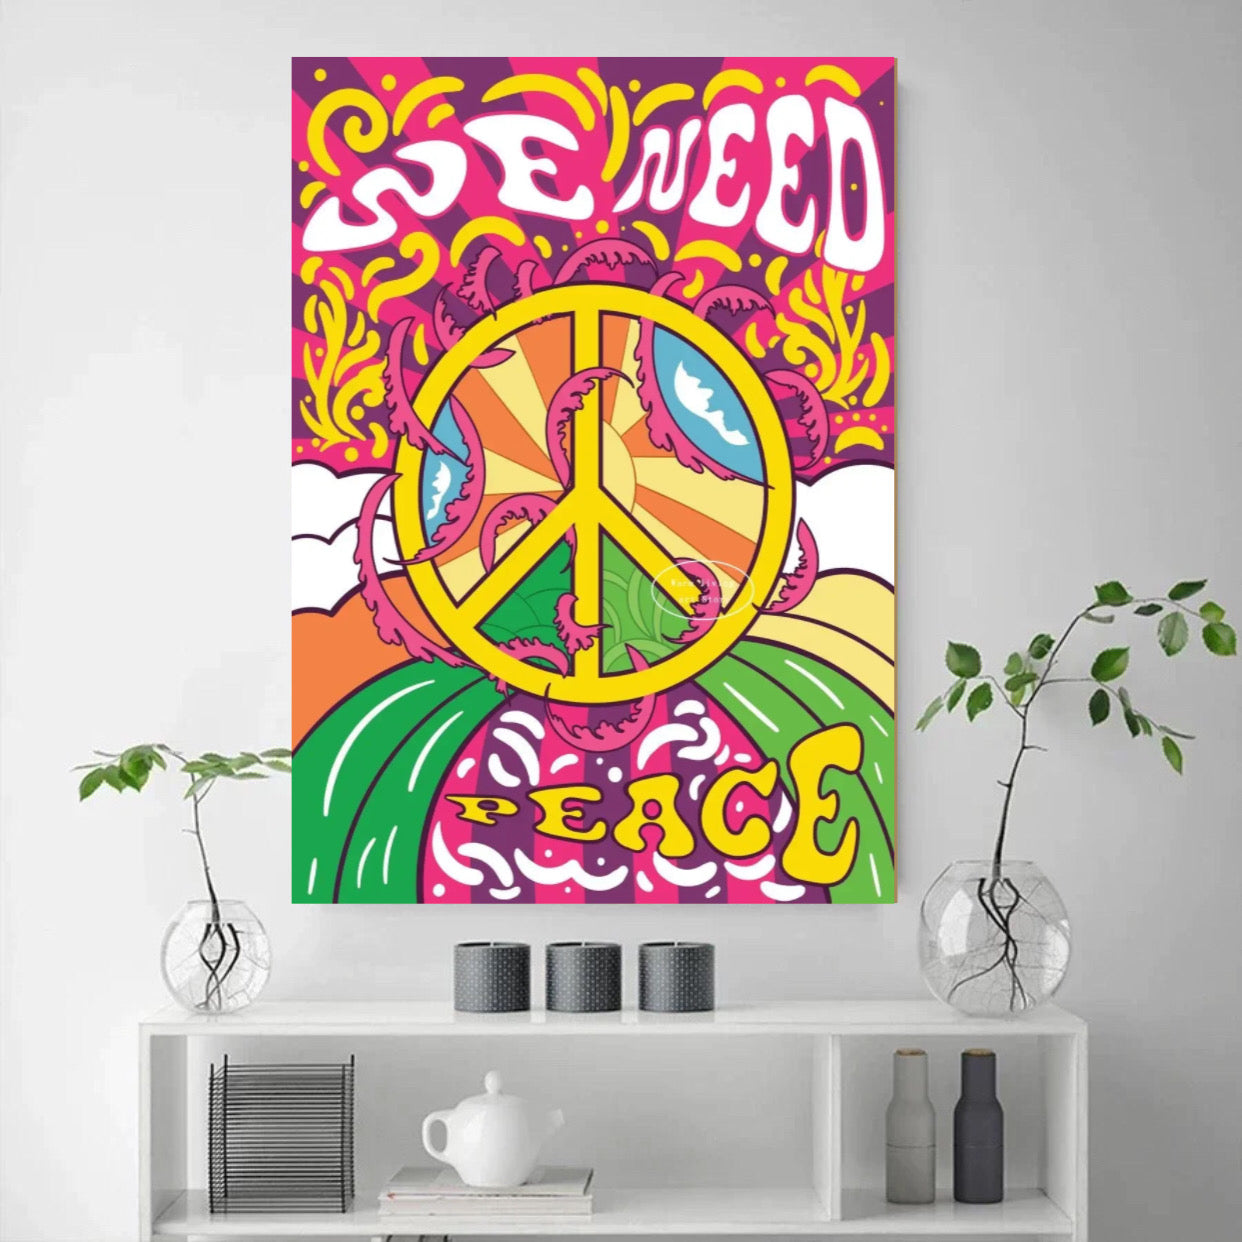 "we need peace" poster